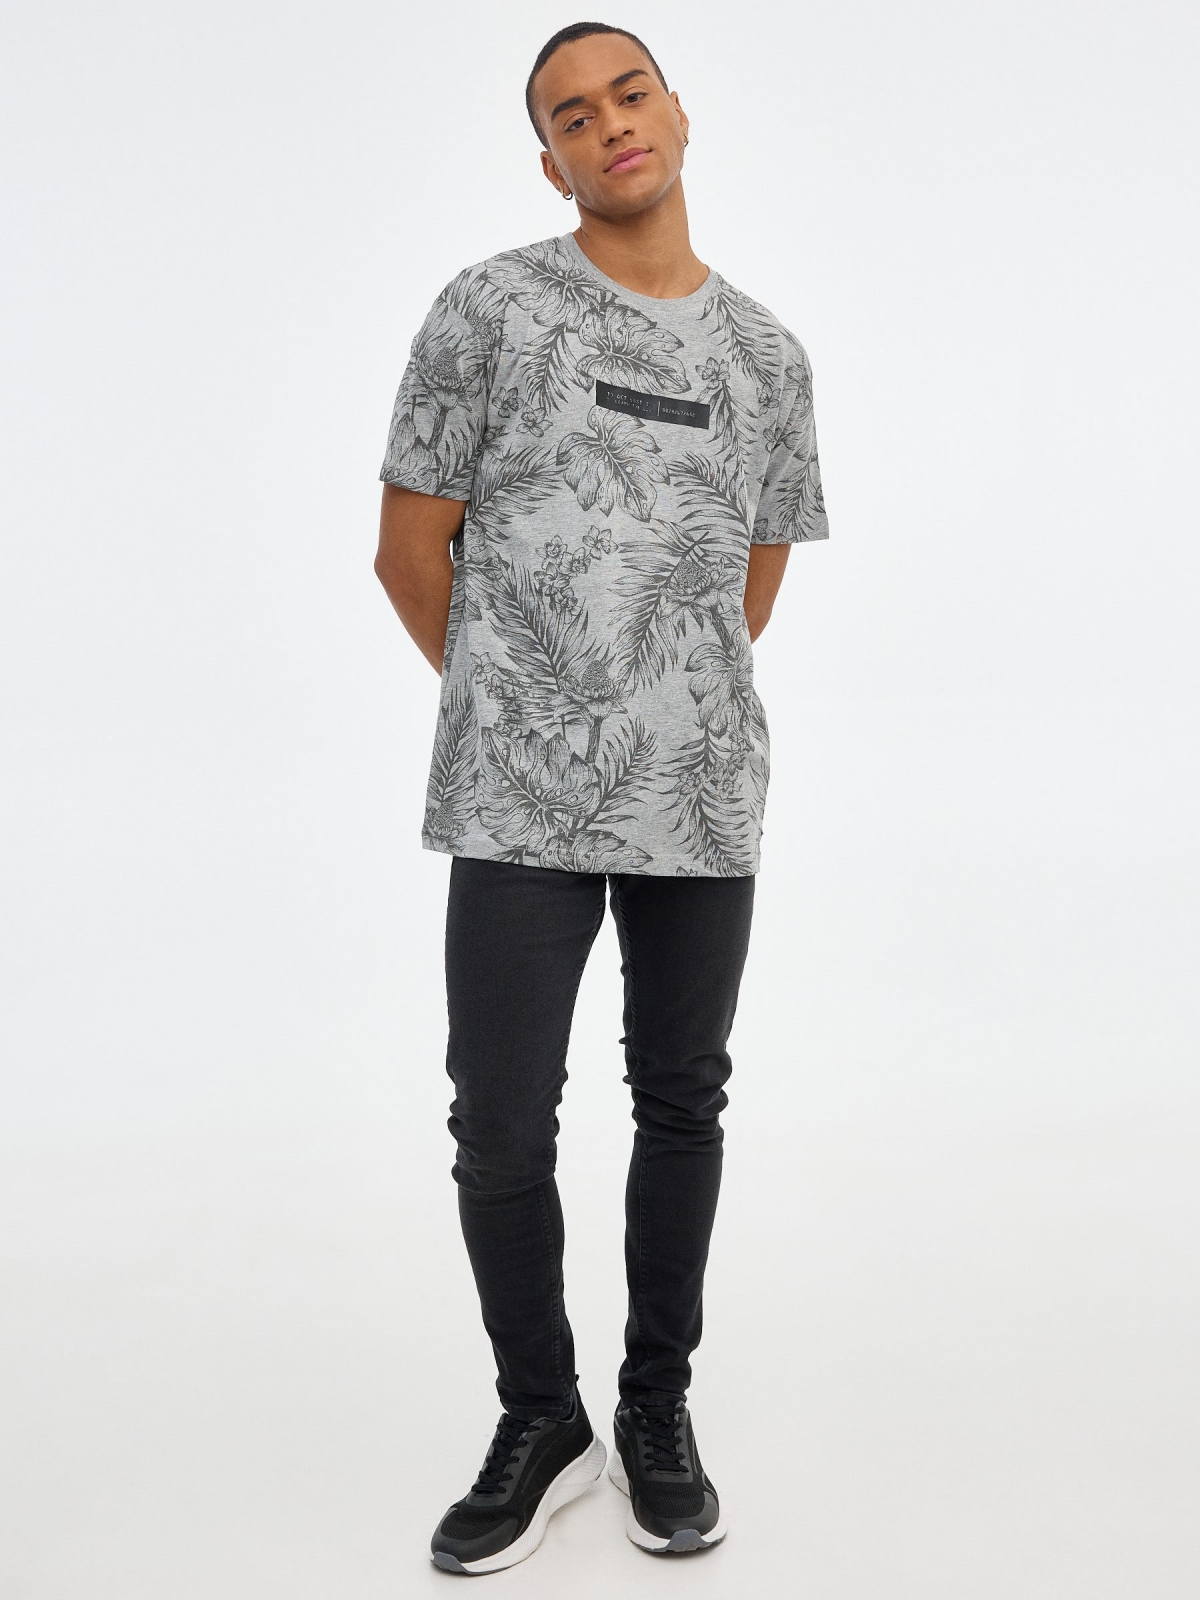 Tropical print t-shirt with graphic grey front view